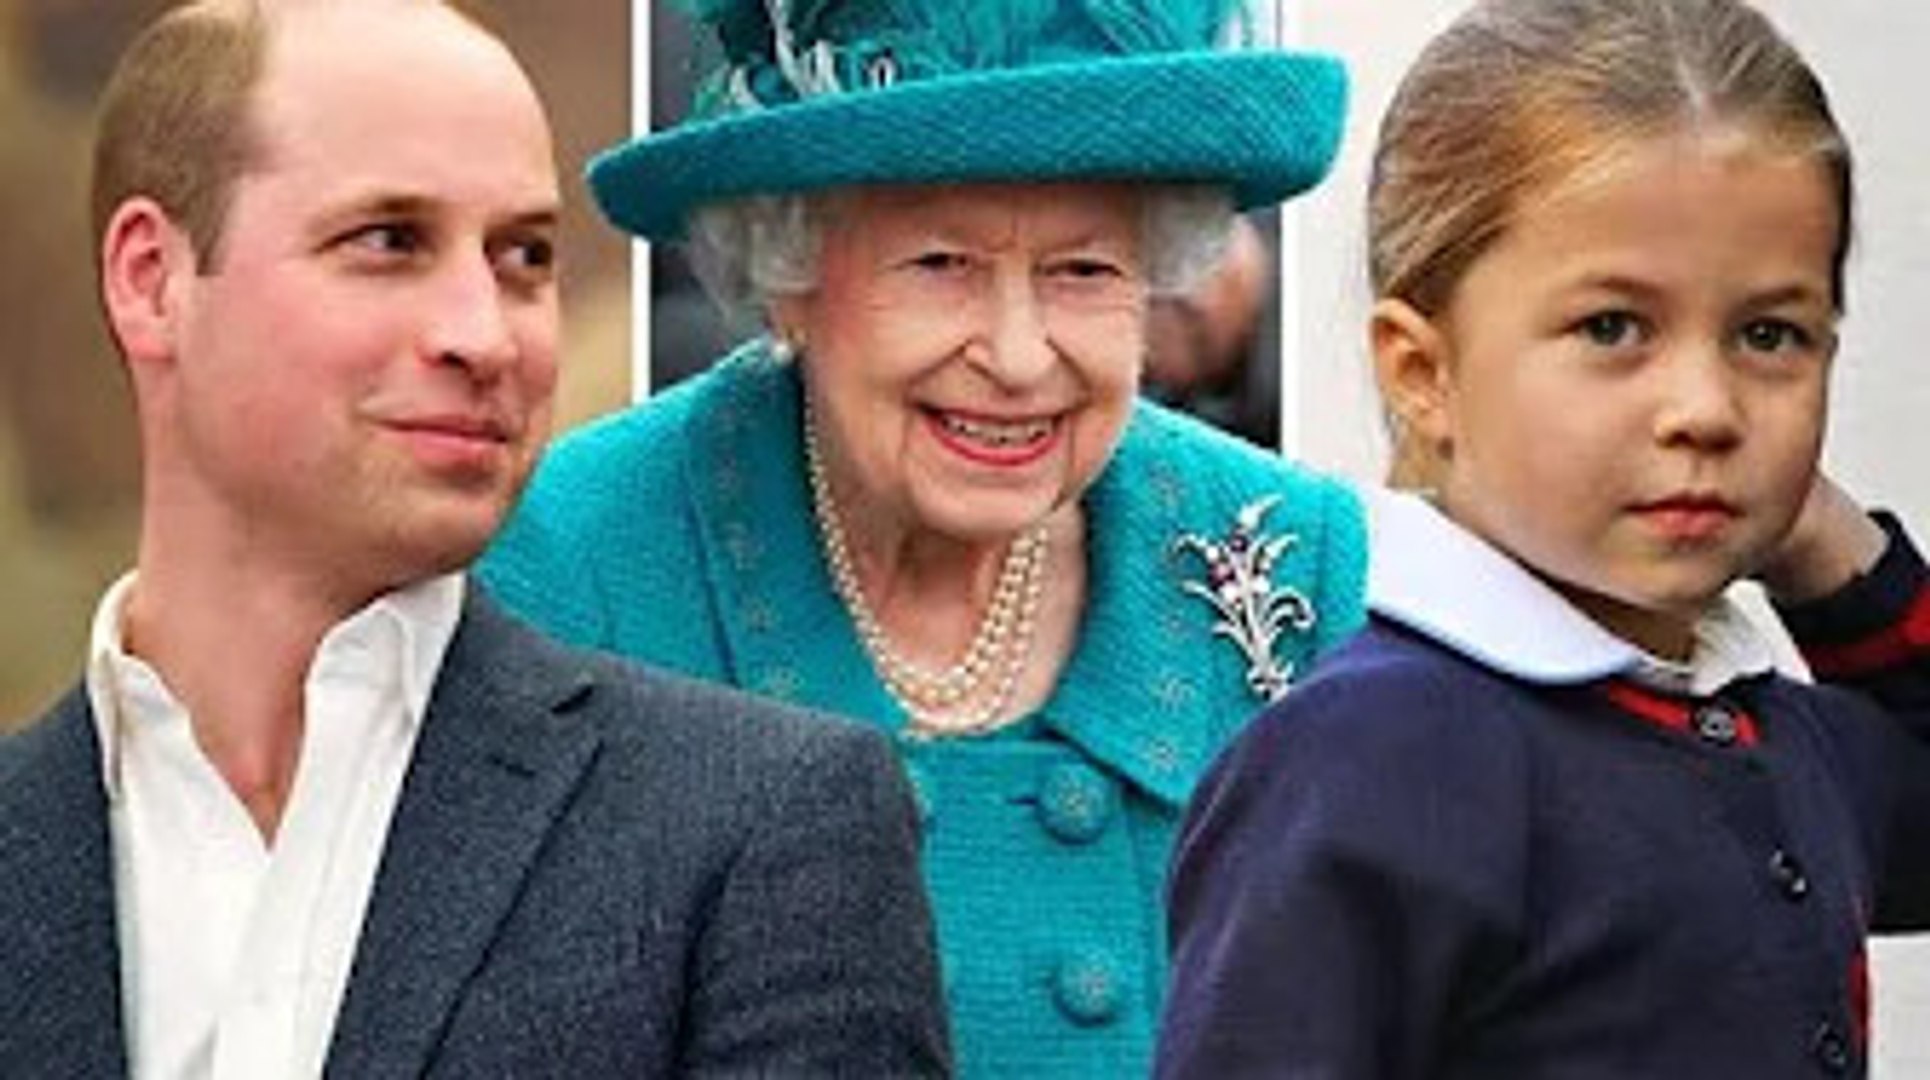 The most unusual Royal Family nicknames - from 'Gary' to 'Wombat'